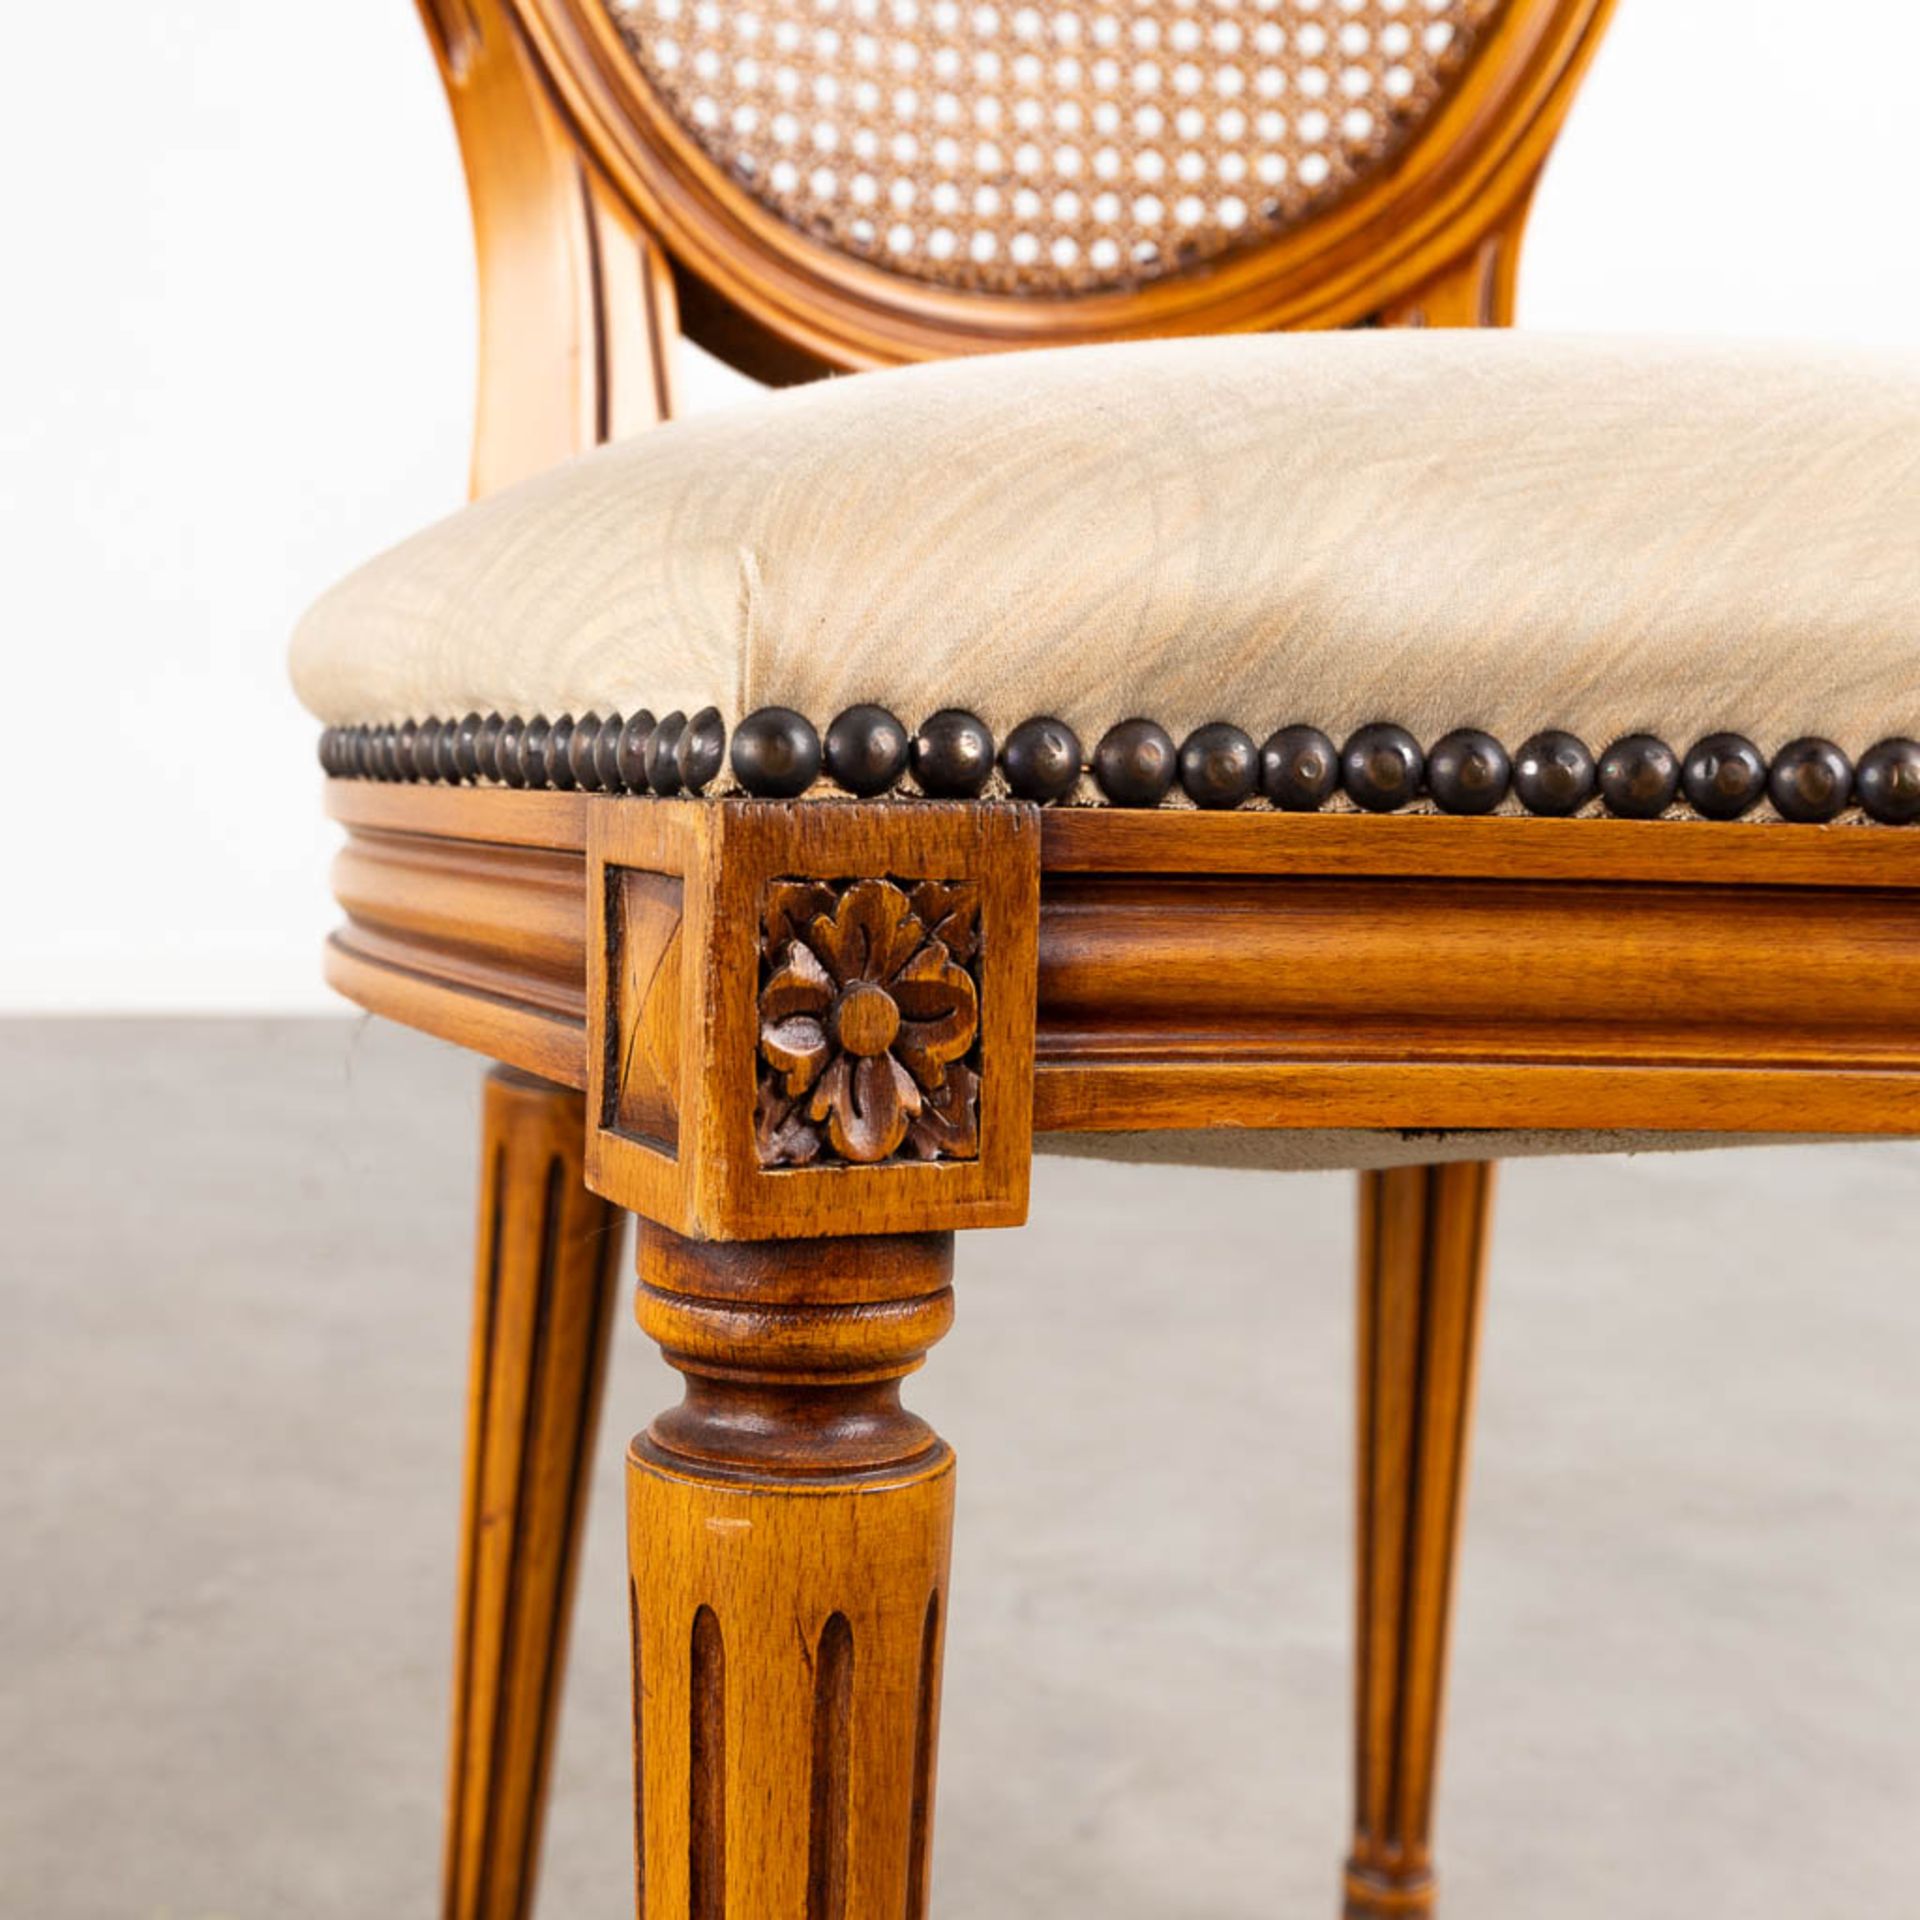 Giorgetti, 8 chairs, Louis XVI style finished with caning. (D:48 x W:48 x H:95 cm) - Image 13 of 13